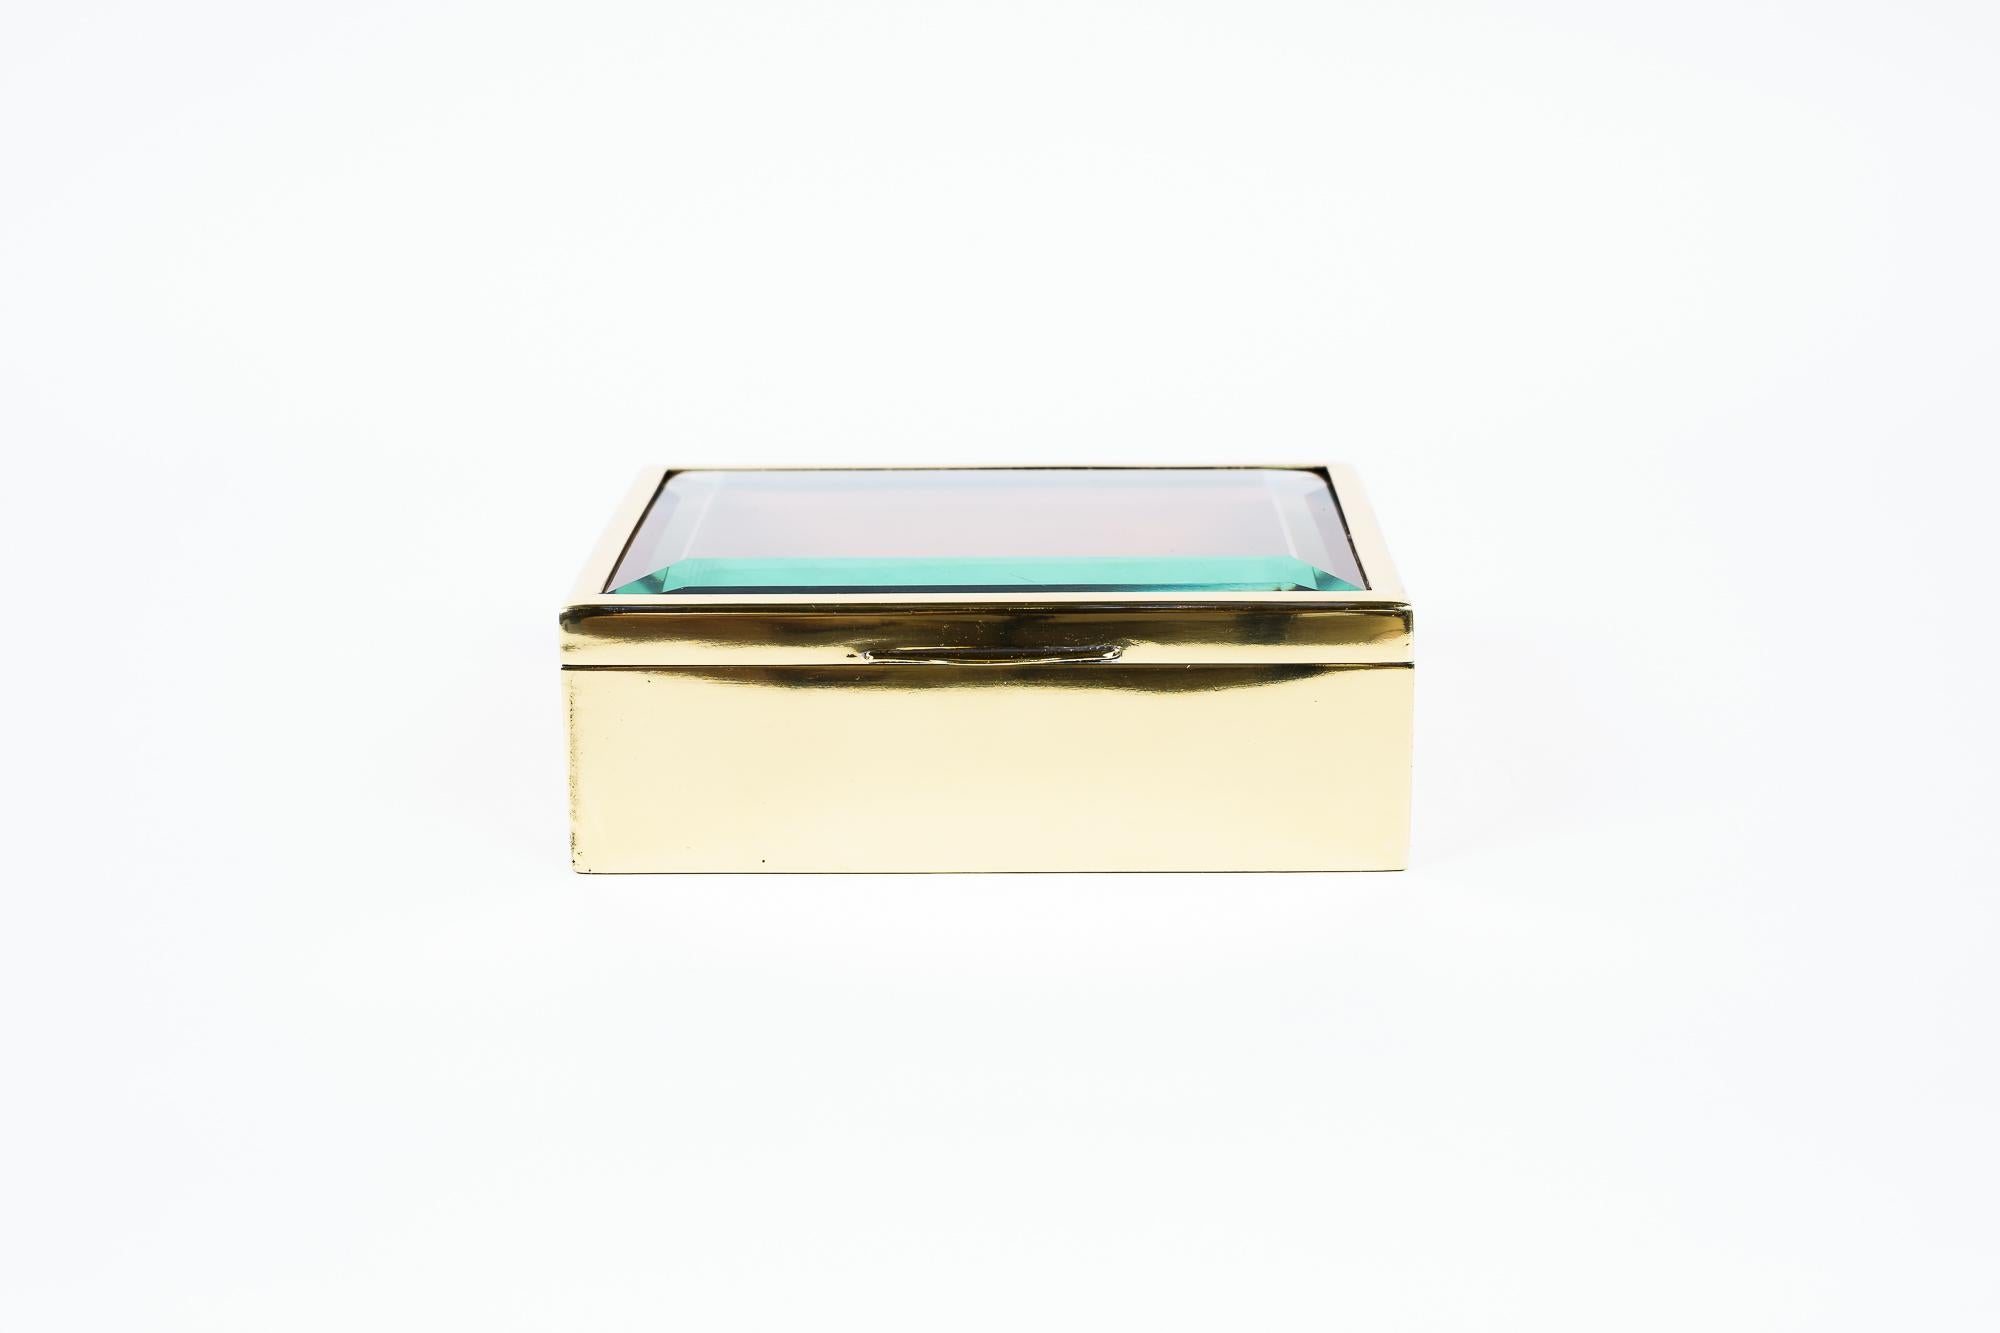 Art Deco jewelry boxes facetted glass, Vienna around 1920s
Brass polished 
Original glass
Original wood
facetted glass.